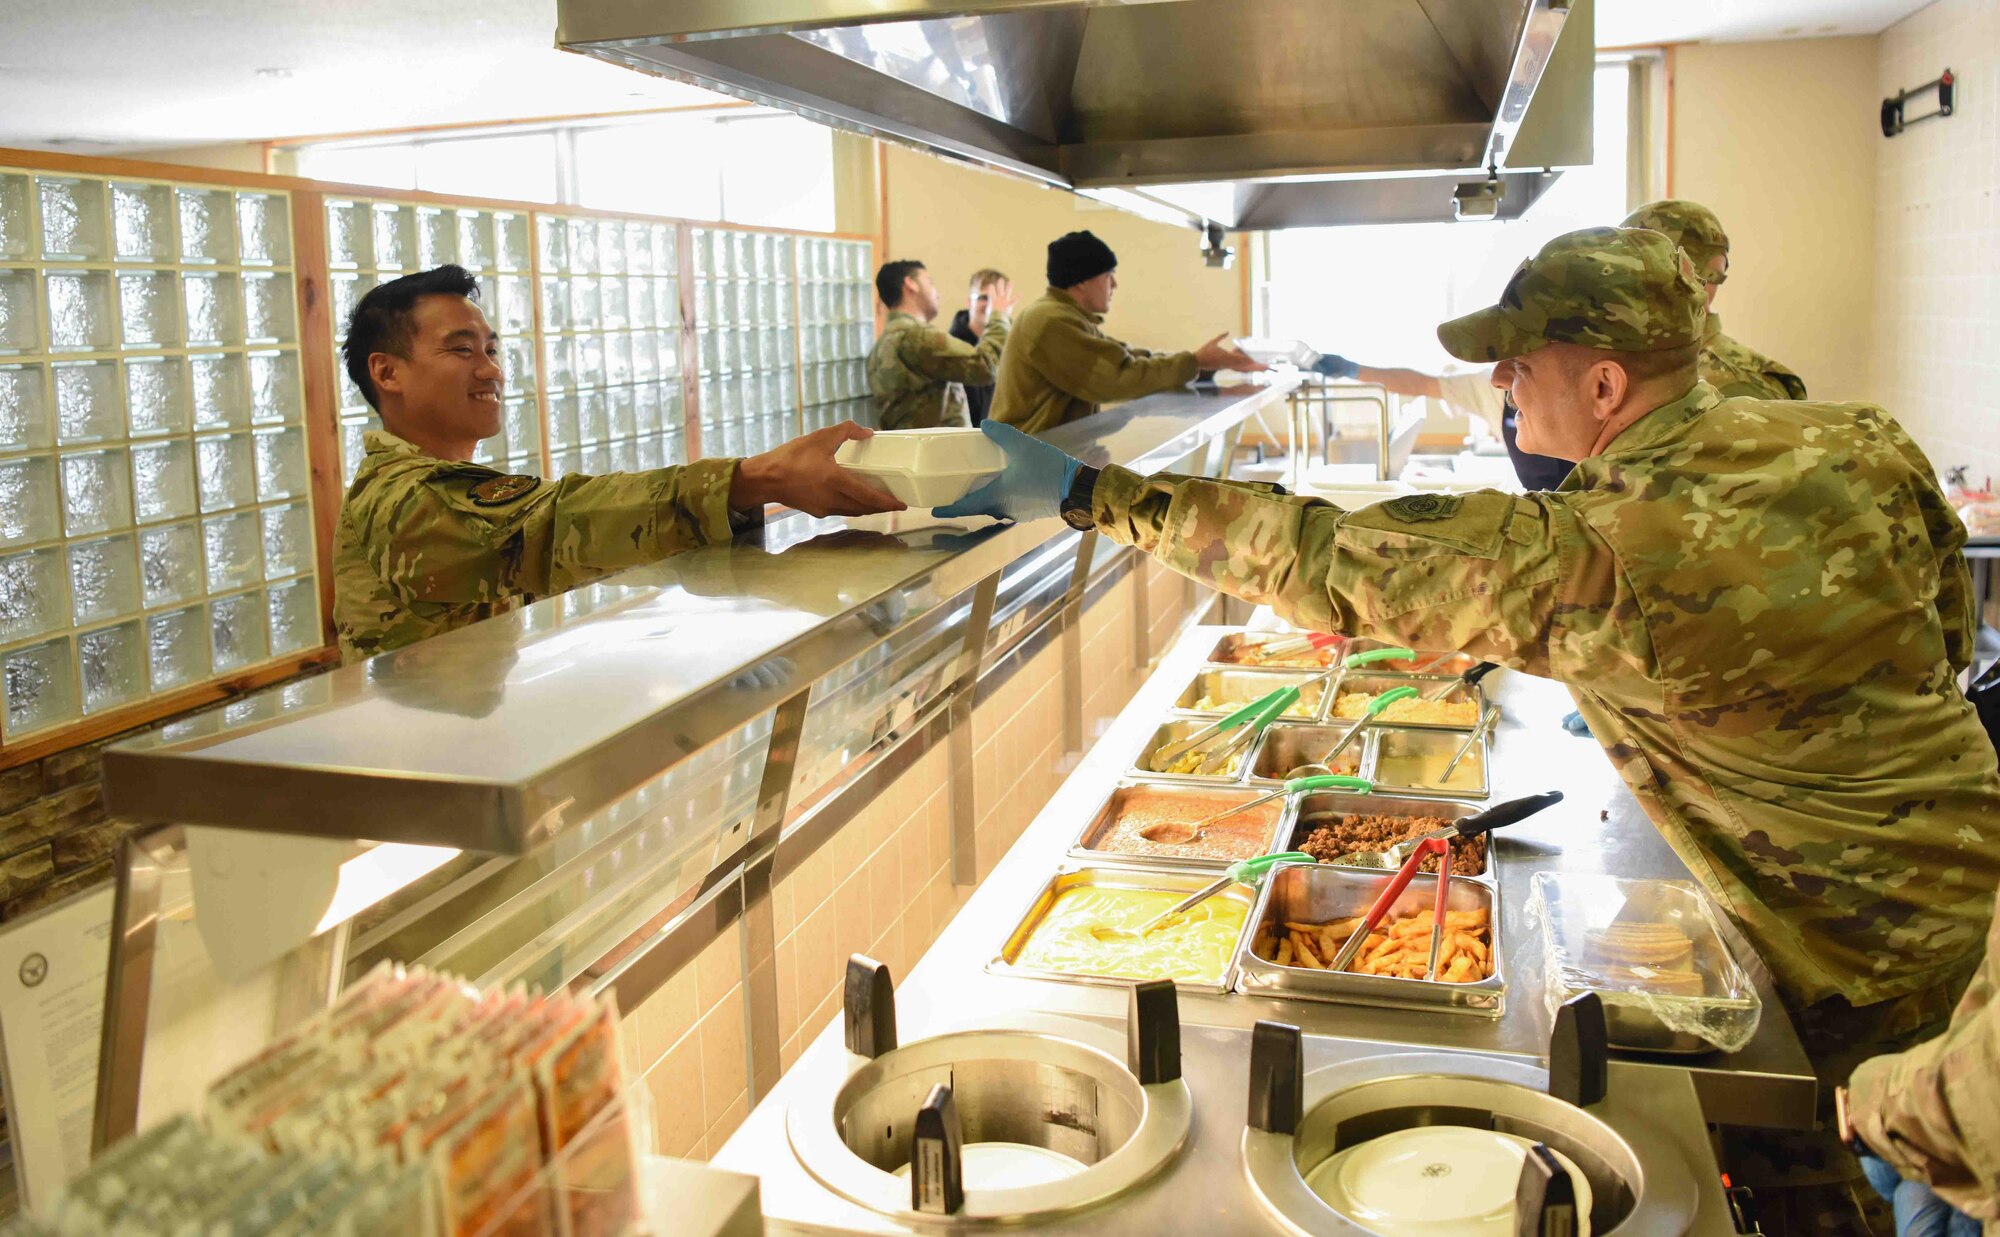 A military member serves food to another military member